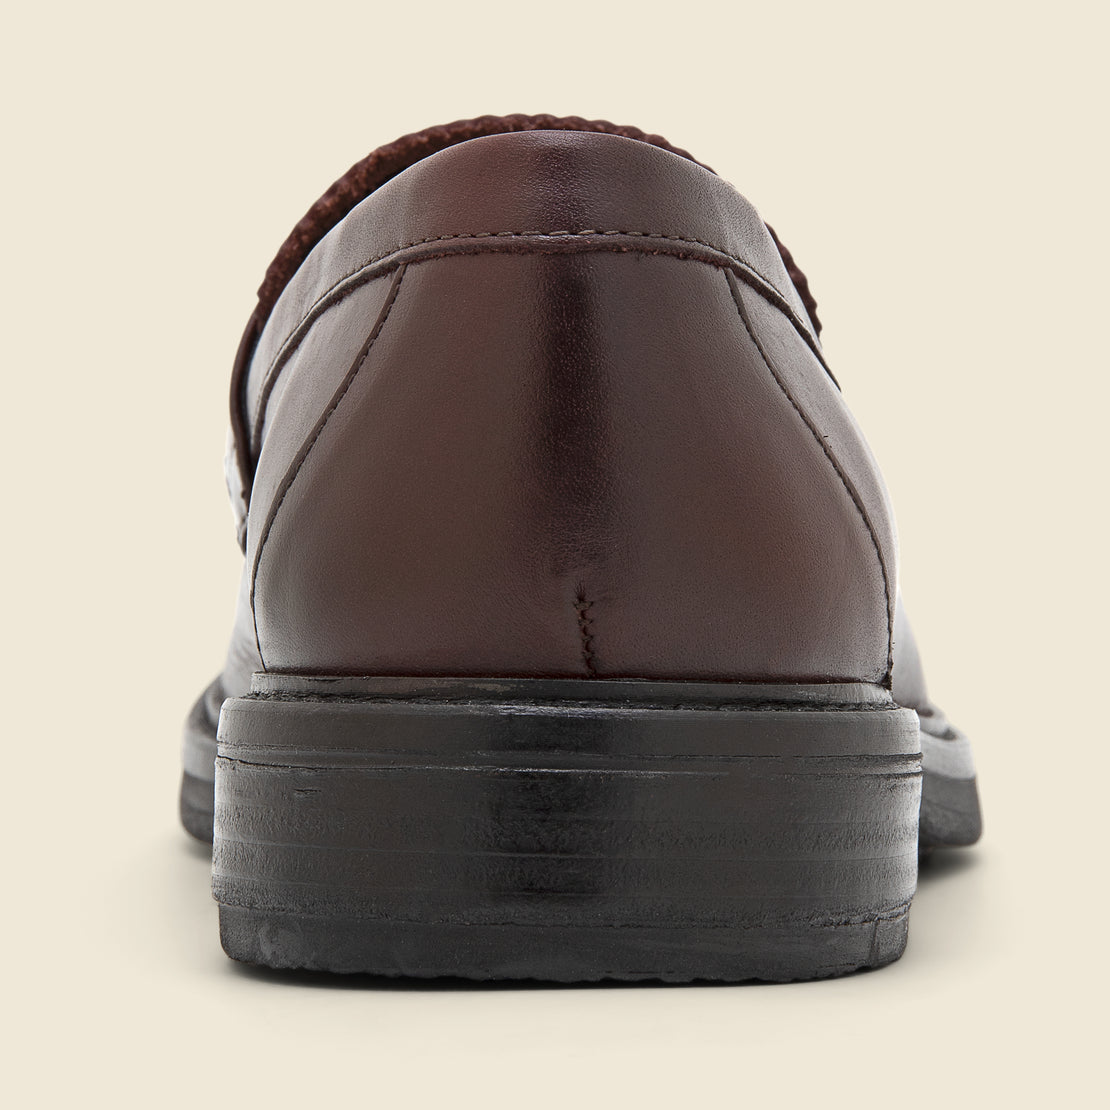 Stanley Leather Loafer - Chestnut - Shoe the Bear - STAG Provisions - Shoes - Boots / Chukkas